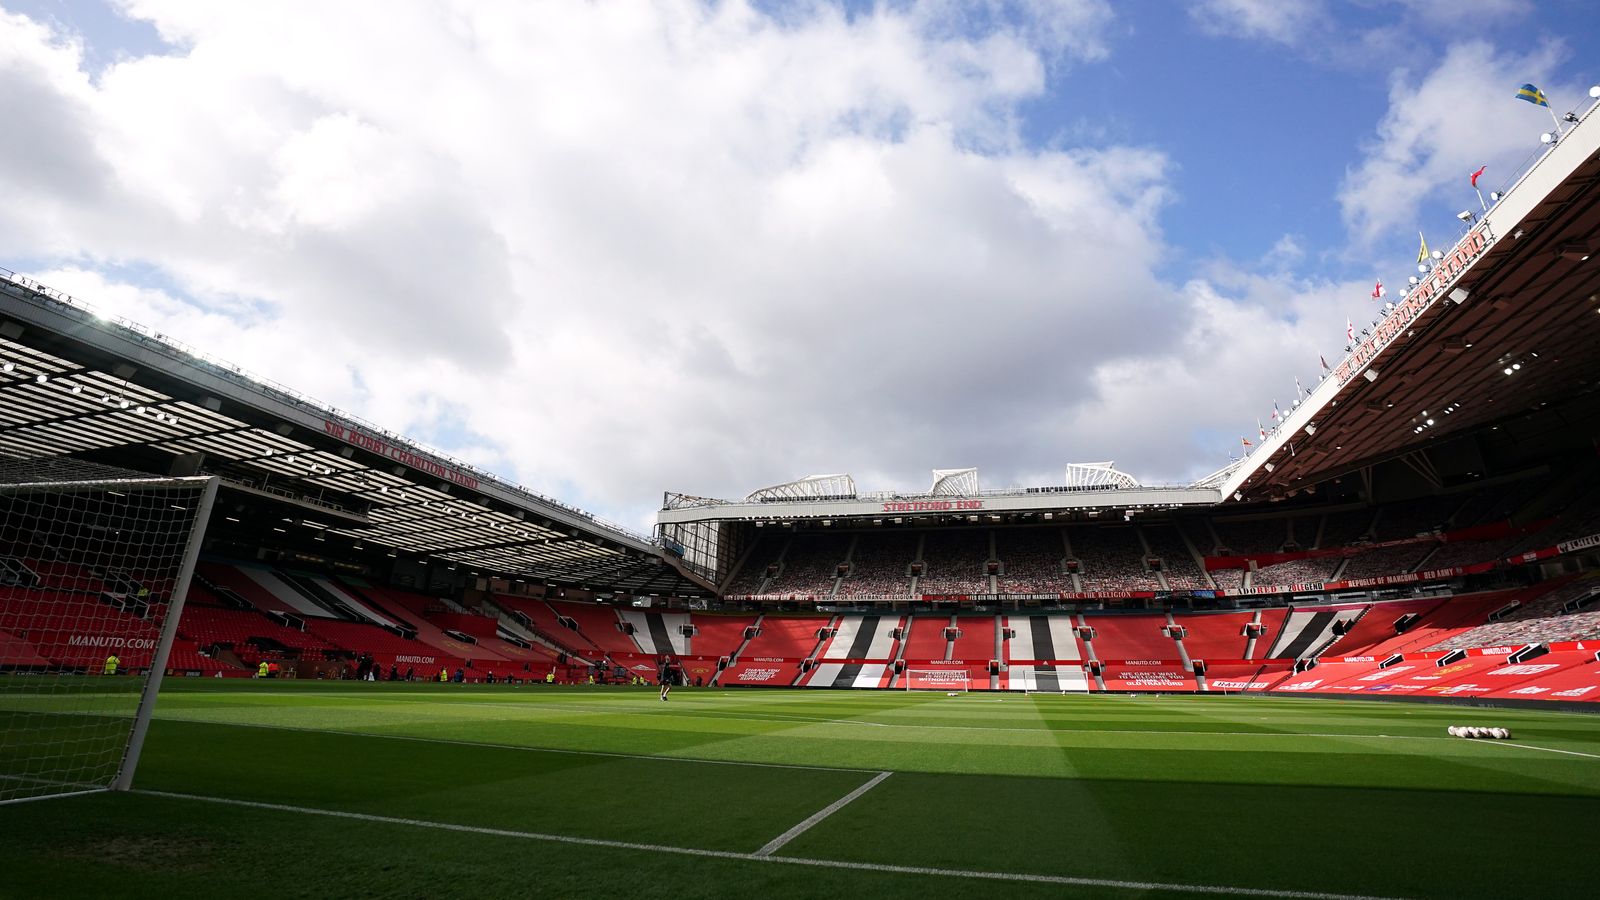 Manchester United hit by ‘small number’ of Covid-19 cases among players and staff